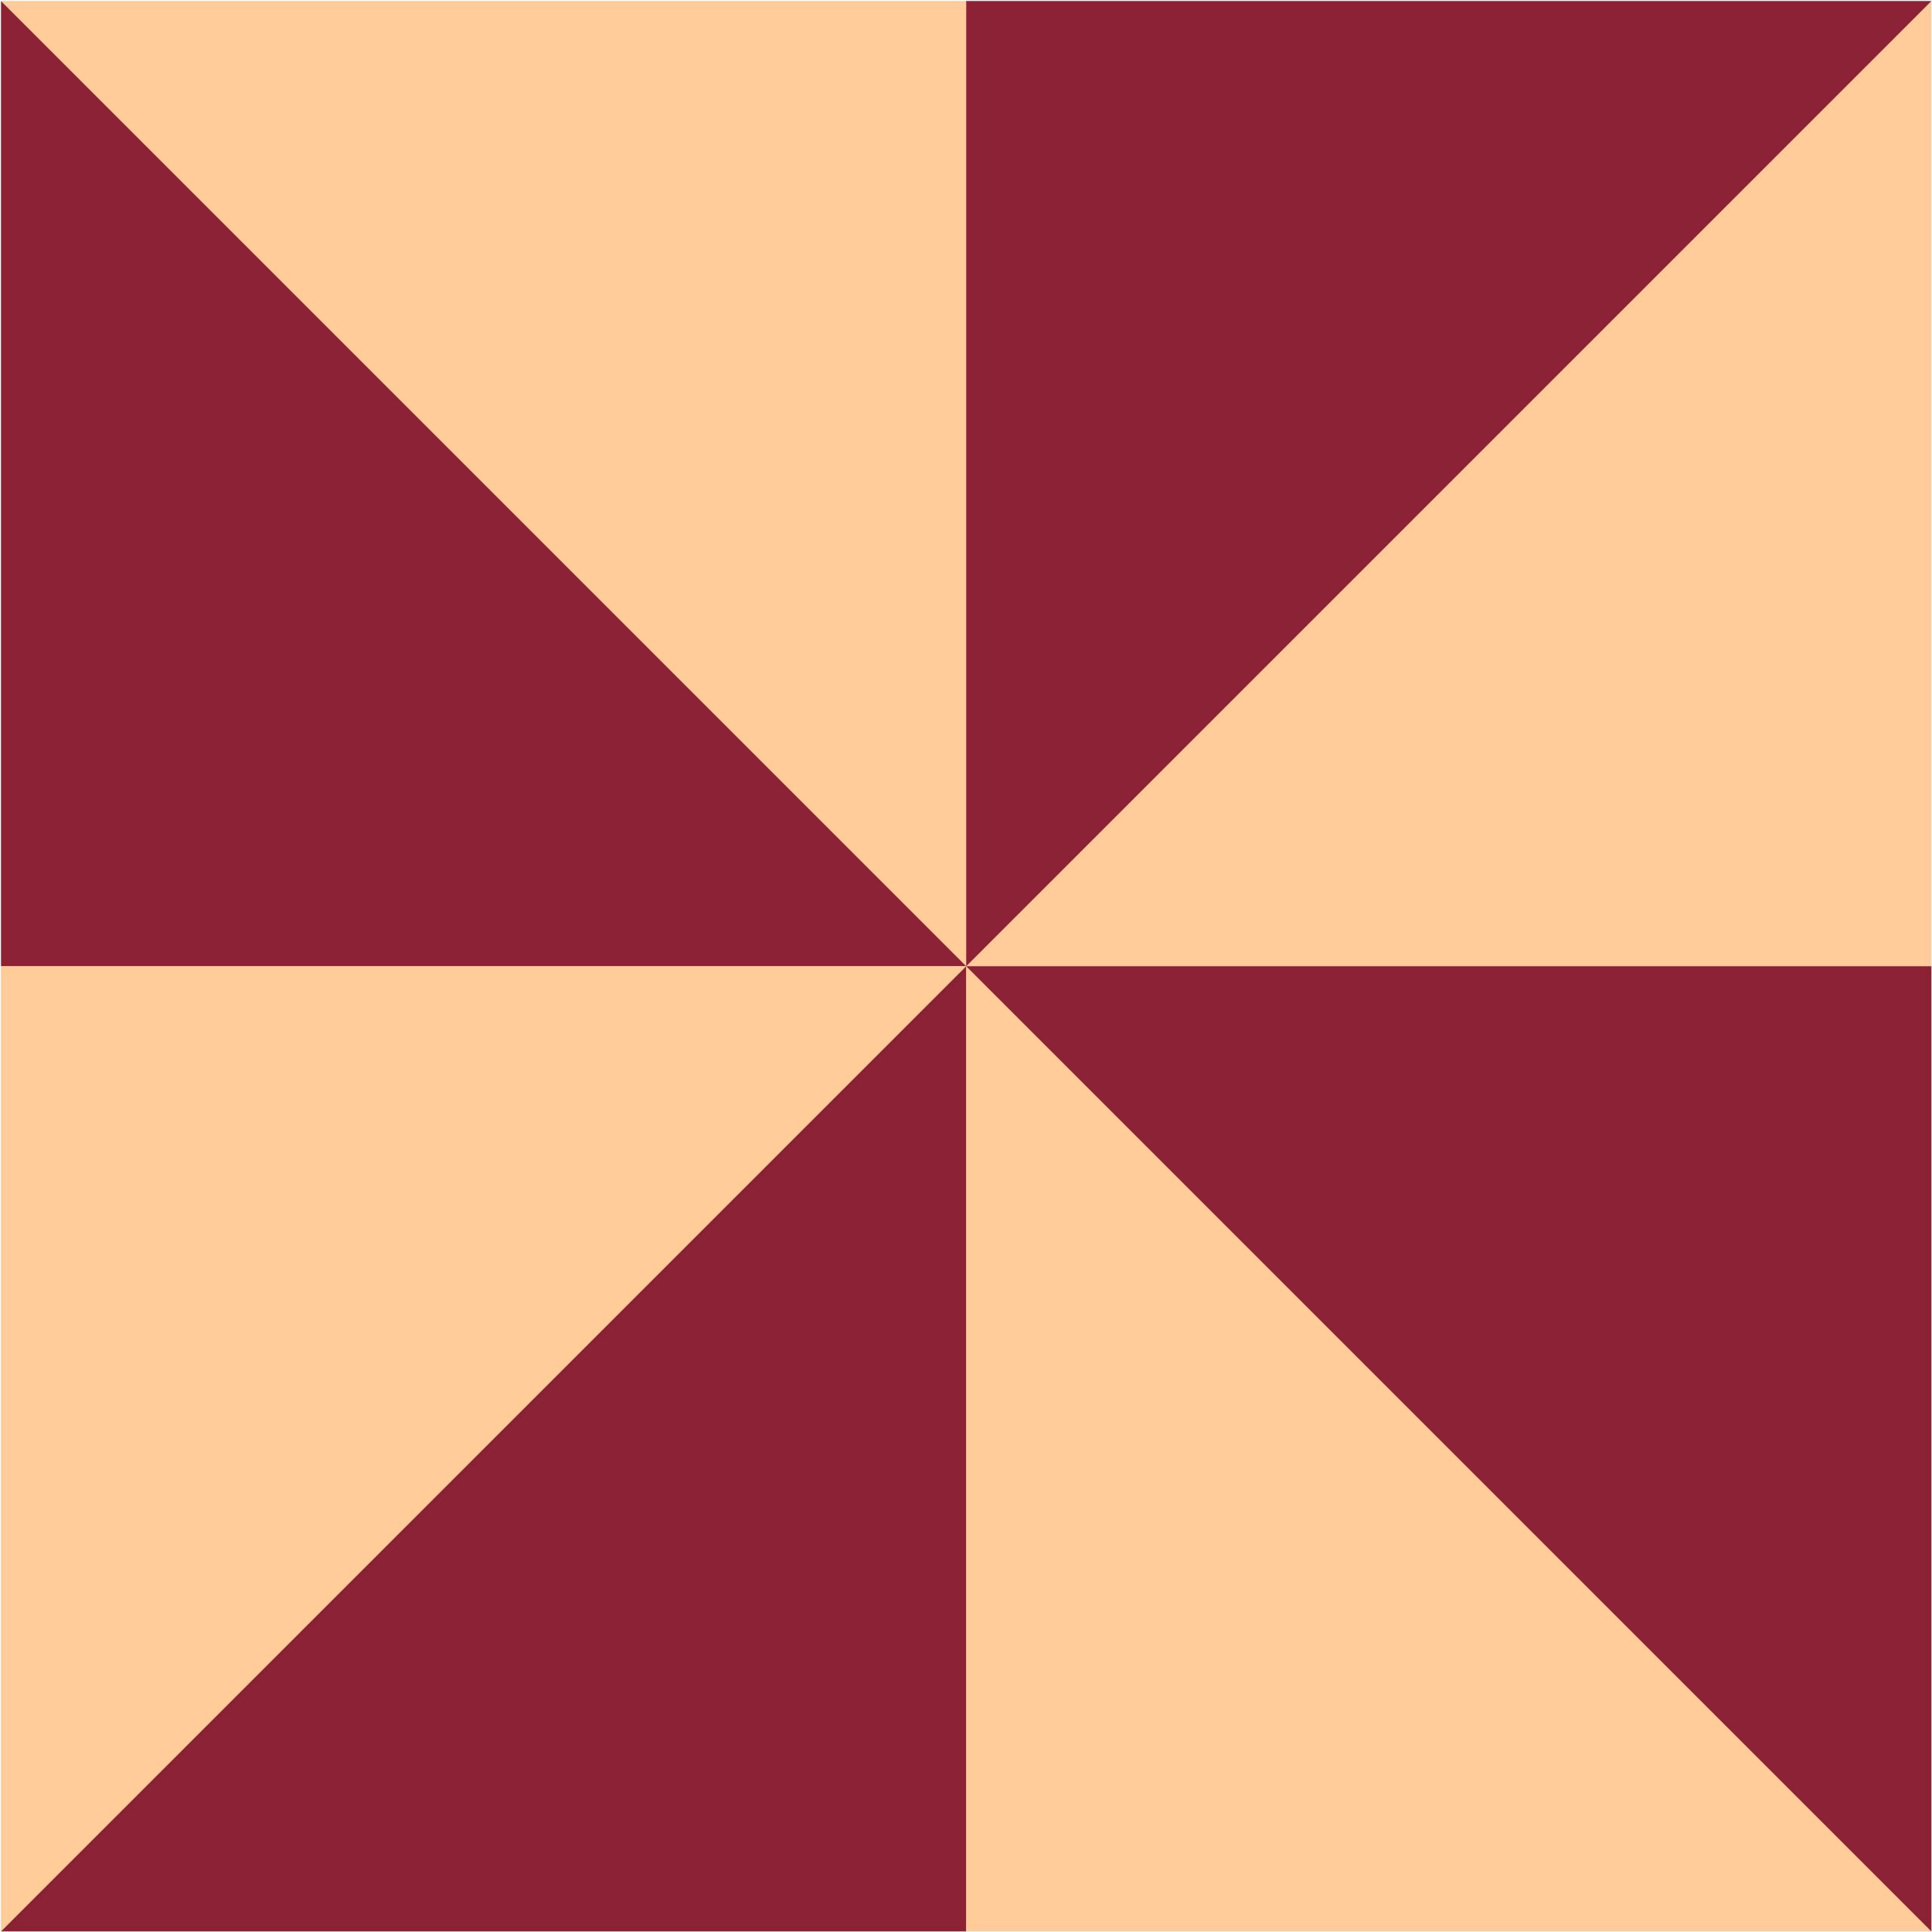 8 half square triangles in a pinwheel shape